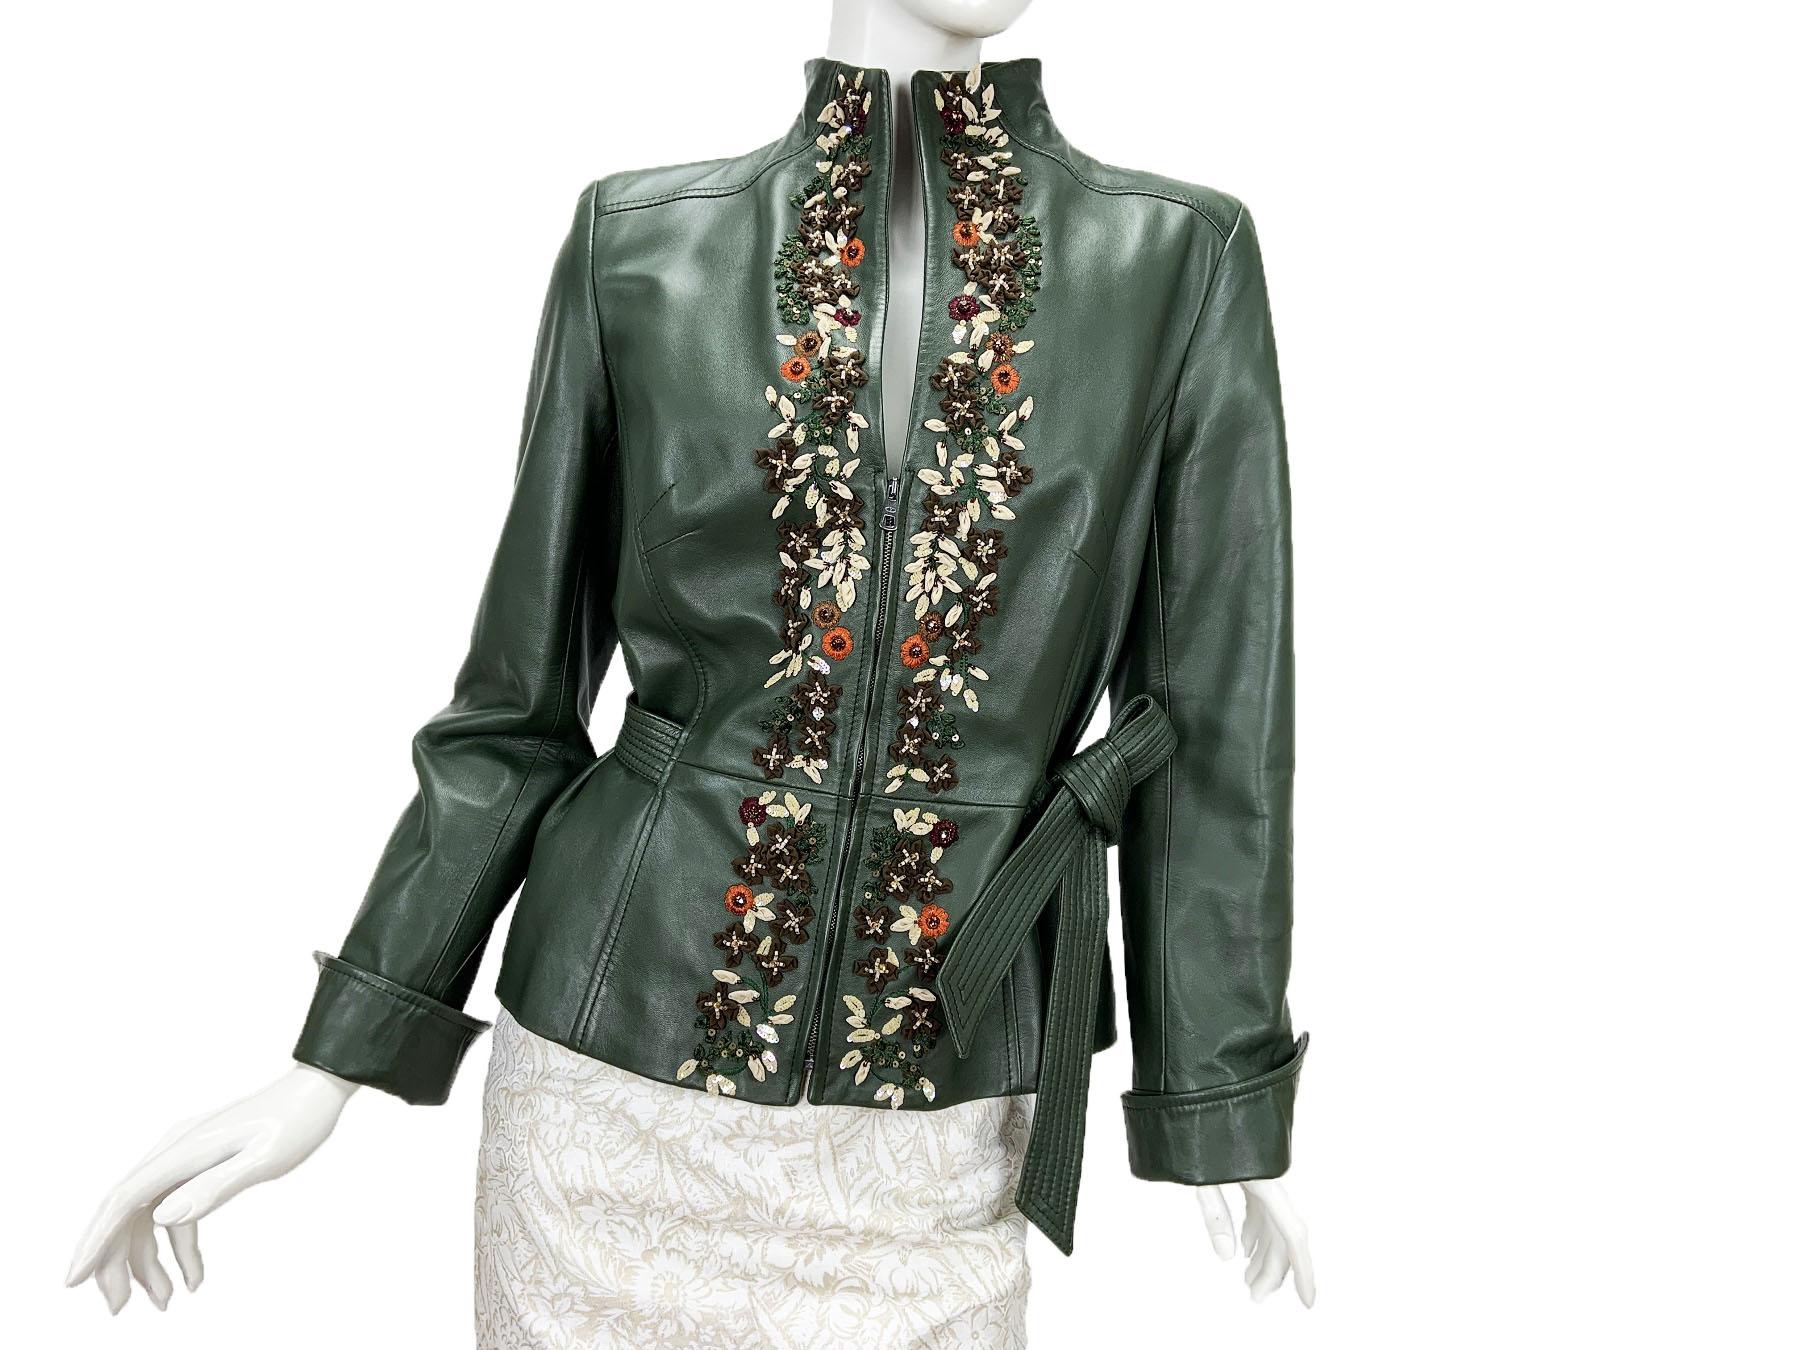 Valentino Embellished Green Leather Elegant and Feminine Fitted Jacket
Designer size - 8
Soft Green Lamb Leather,  3-D Flowers Application, Exclusively Embroidered and Beaded, Attached Belt, Fully Lined, Zip Closure, Double Back Vent.
Measurements: